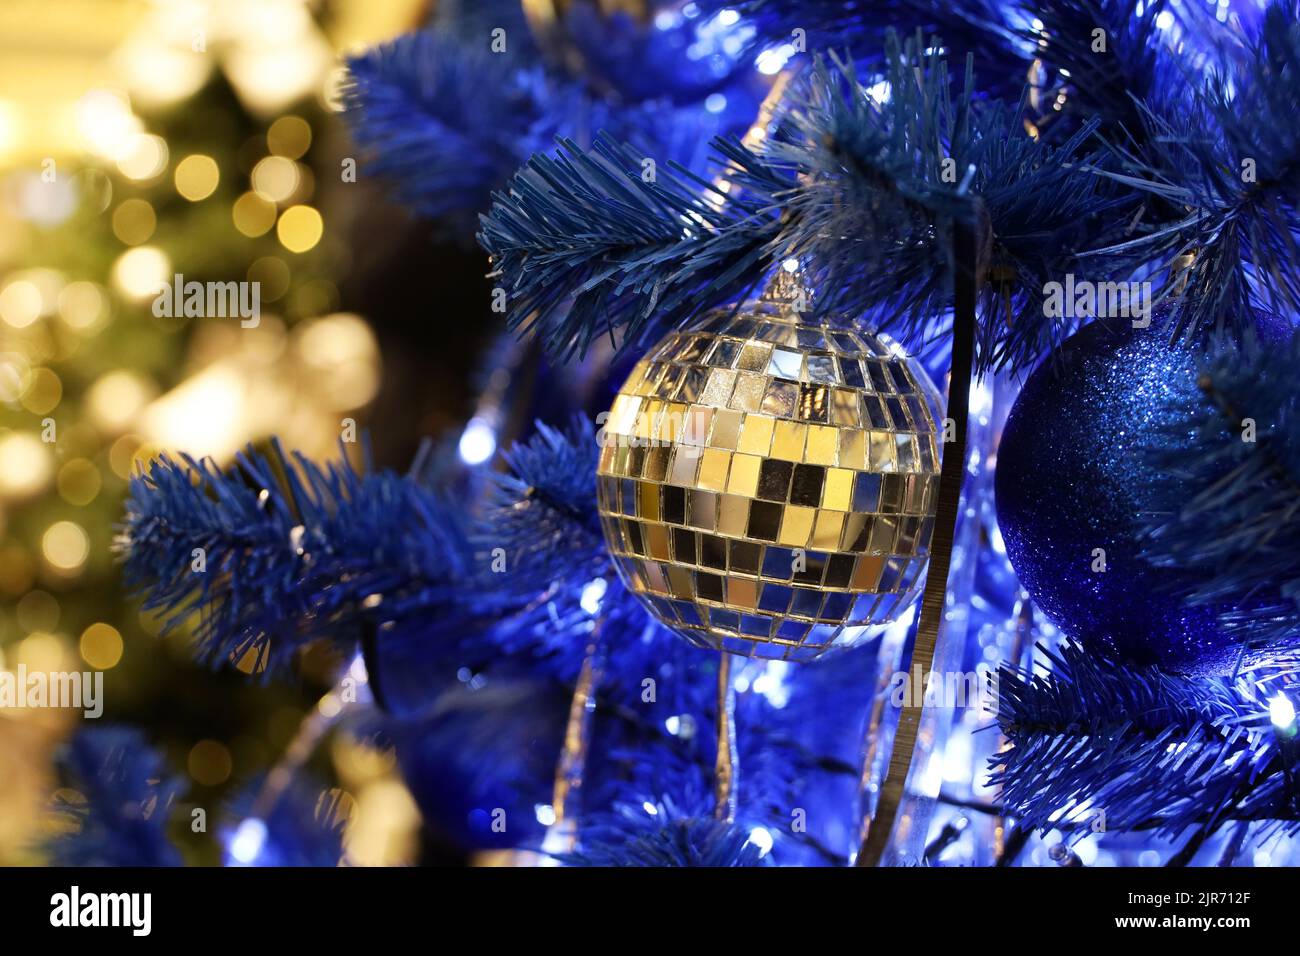 Christmas tree with blue and mirror balls in a shopping mall on background of blurred festive lights. New Year toys and decorations, winter holidays Stock Photo